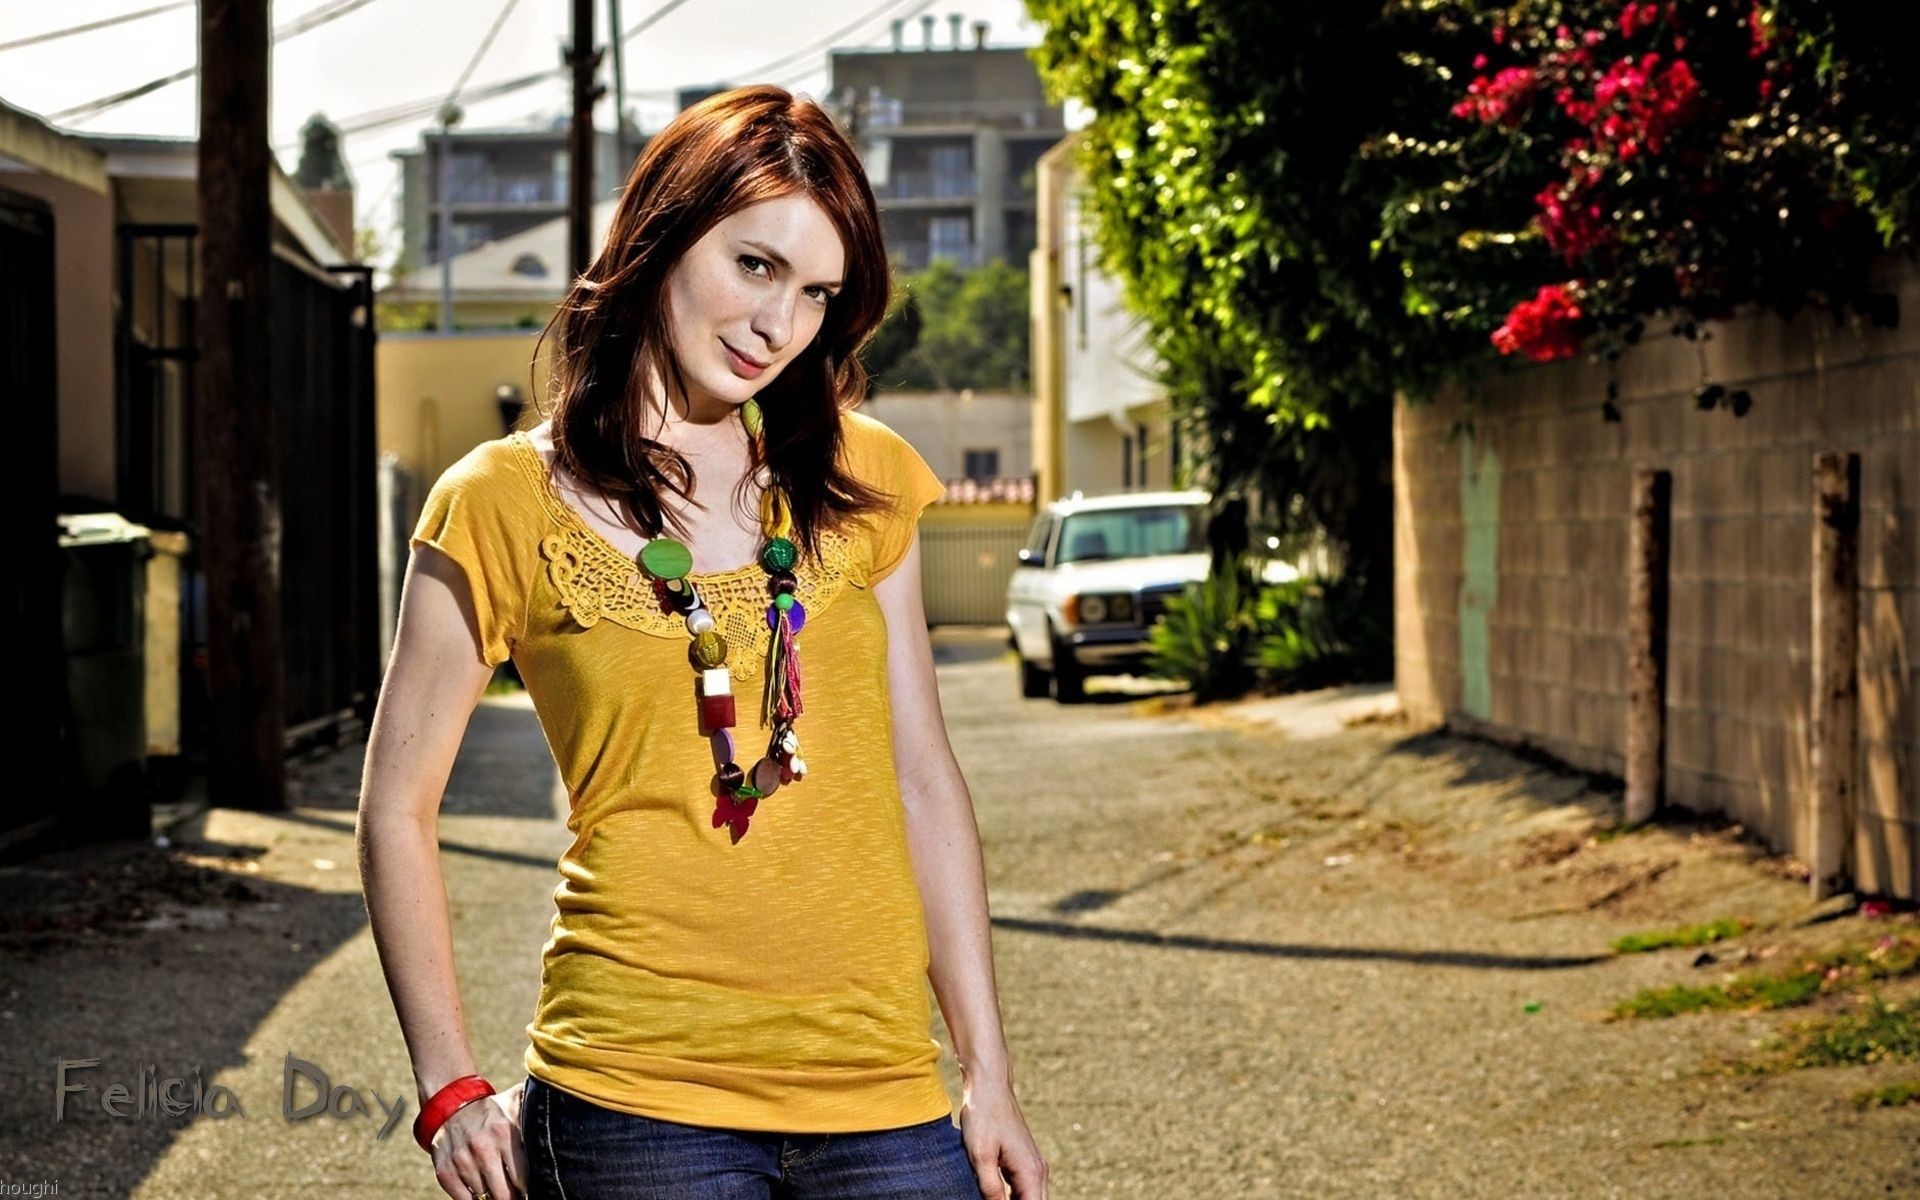 1920x1200 Felicia Day images Felicia Day Bui Brothers Wallpaper HD wallpaper and  background photos